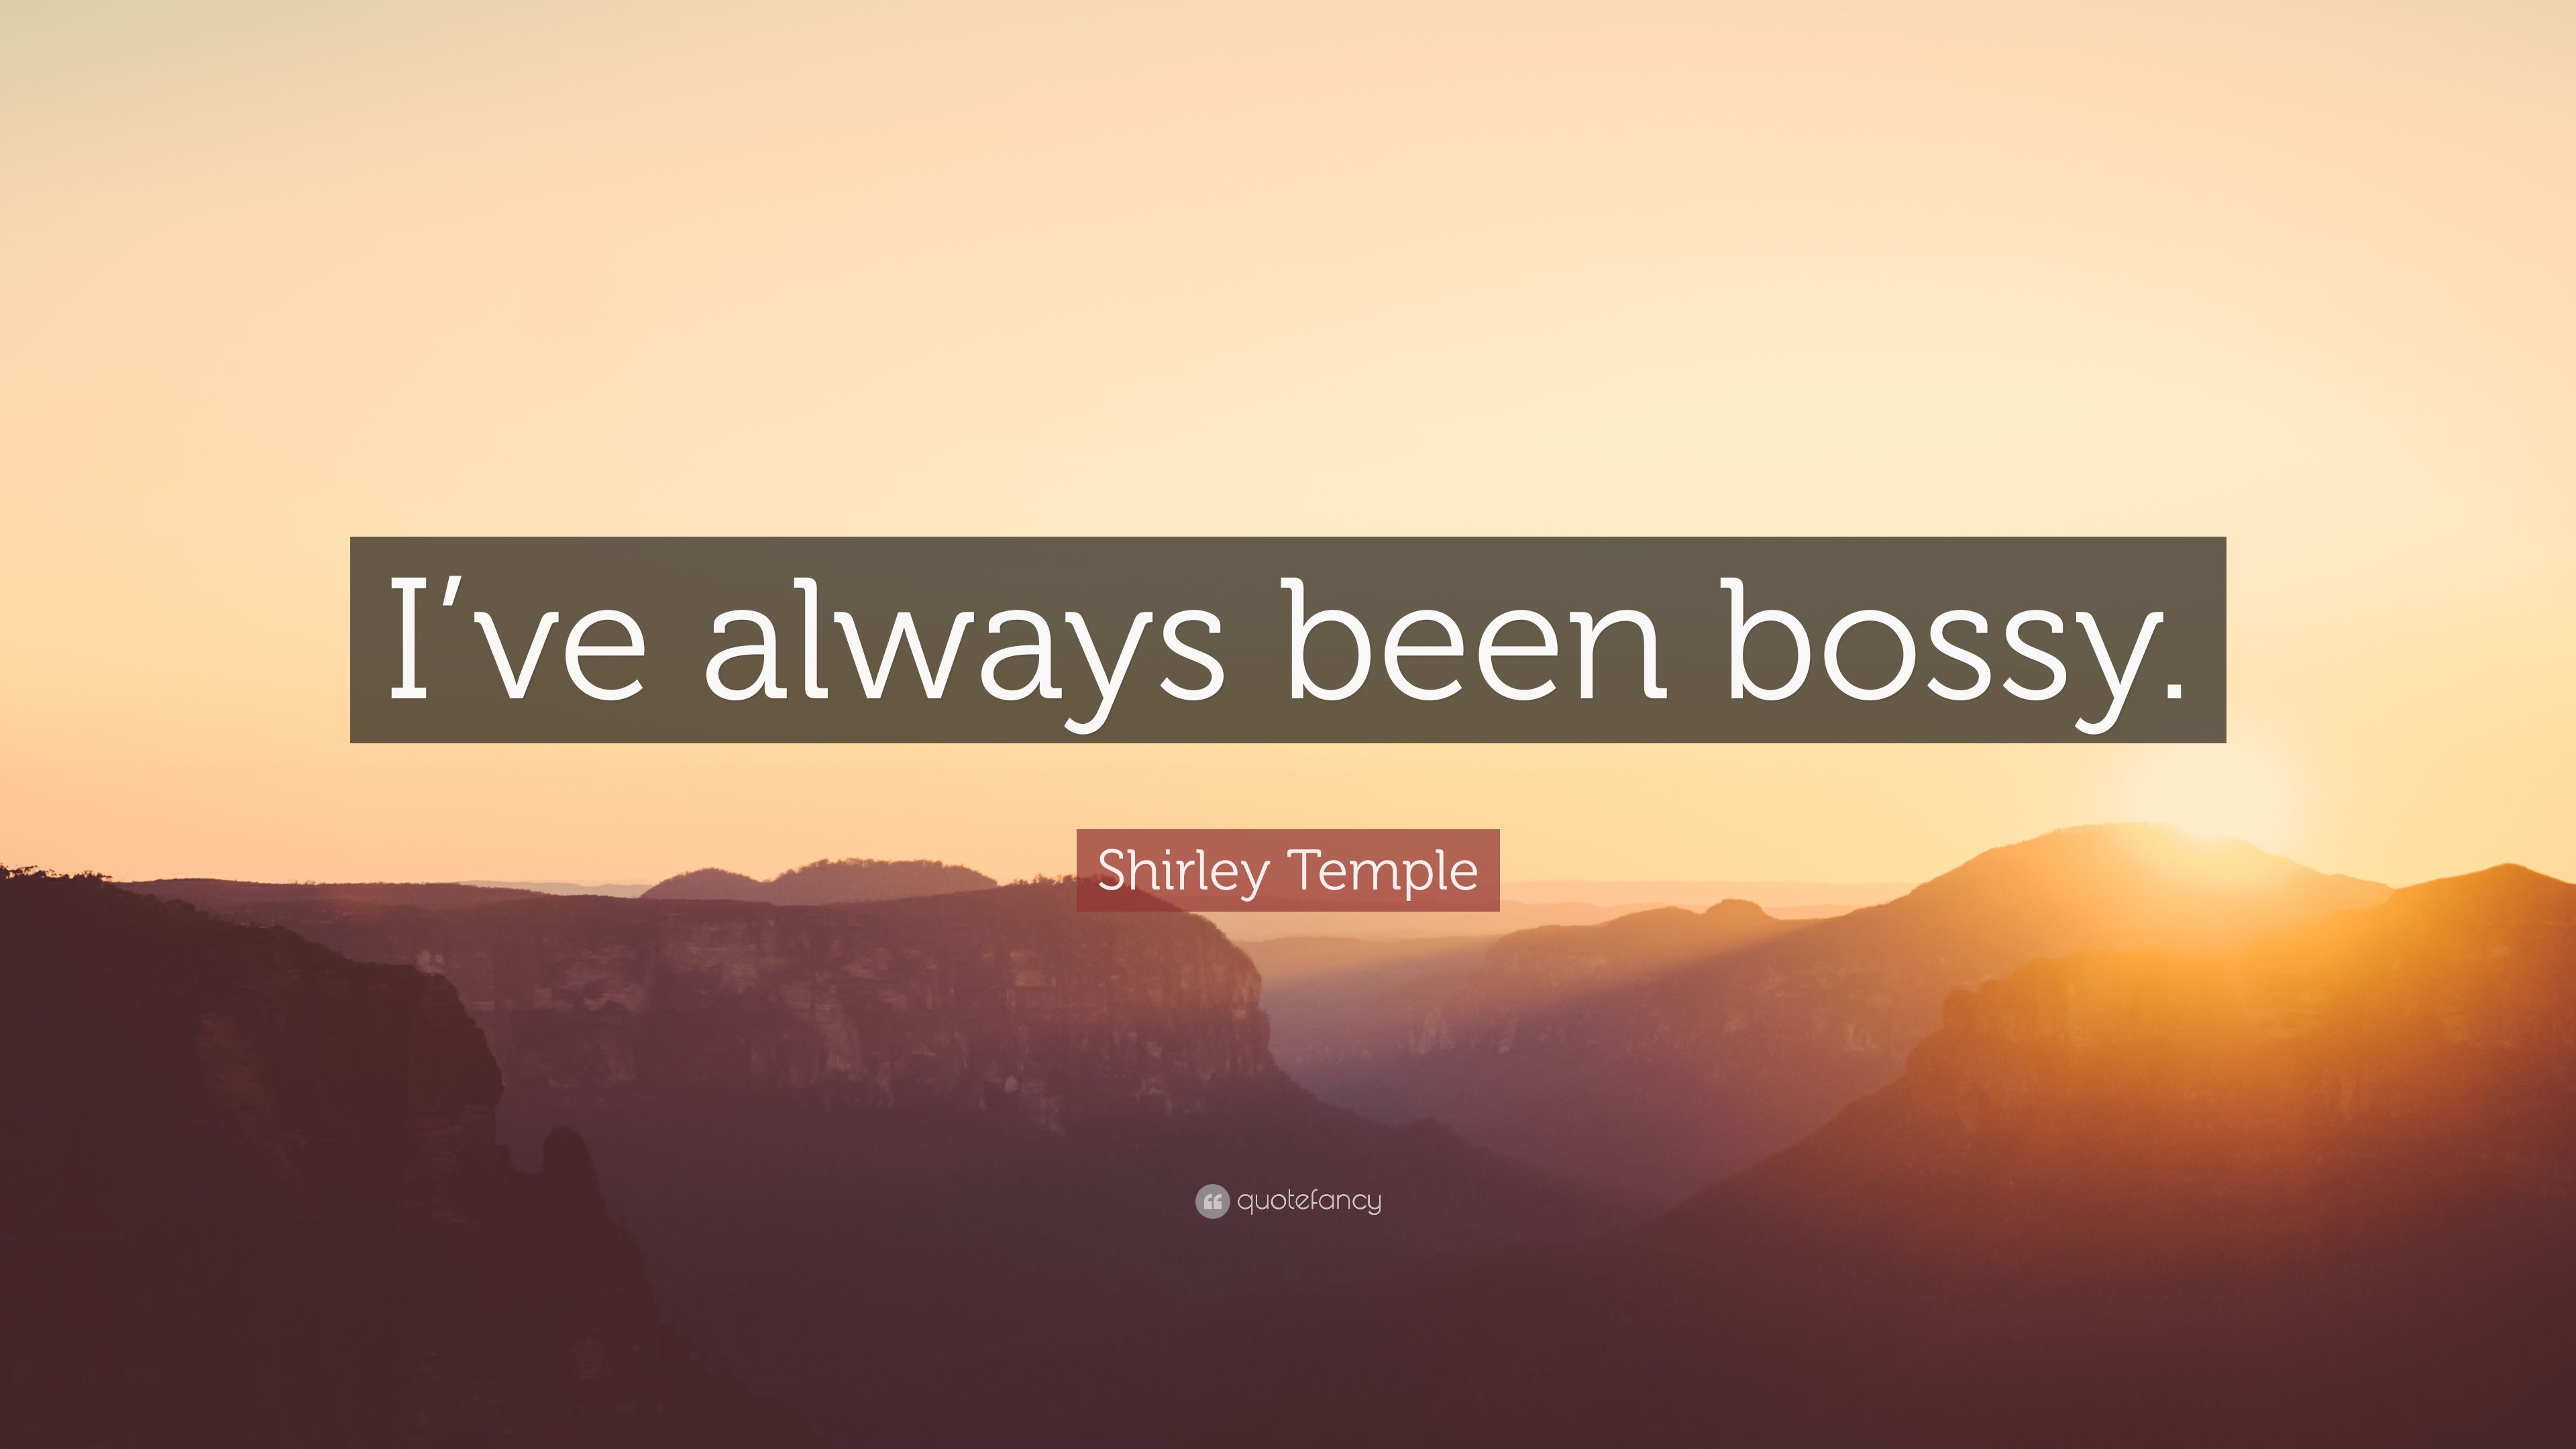 Shirley Temple Quote: “I've always been bossy.” (7 wallpaper)